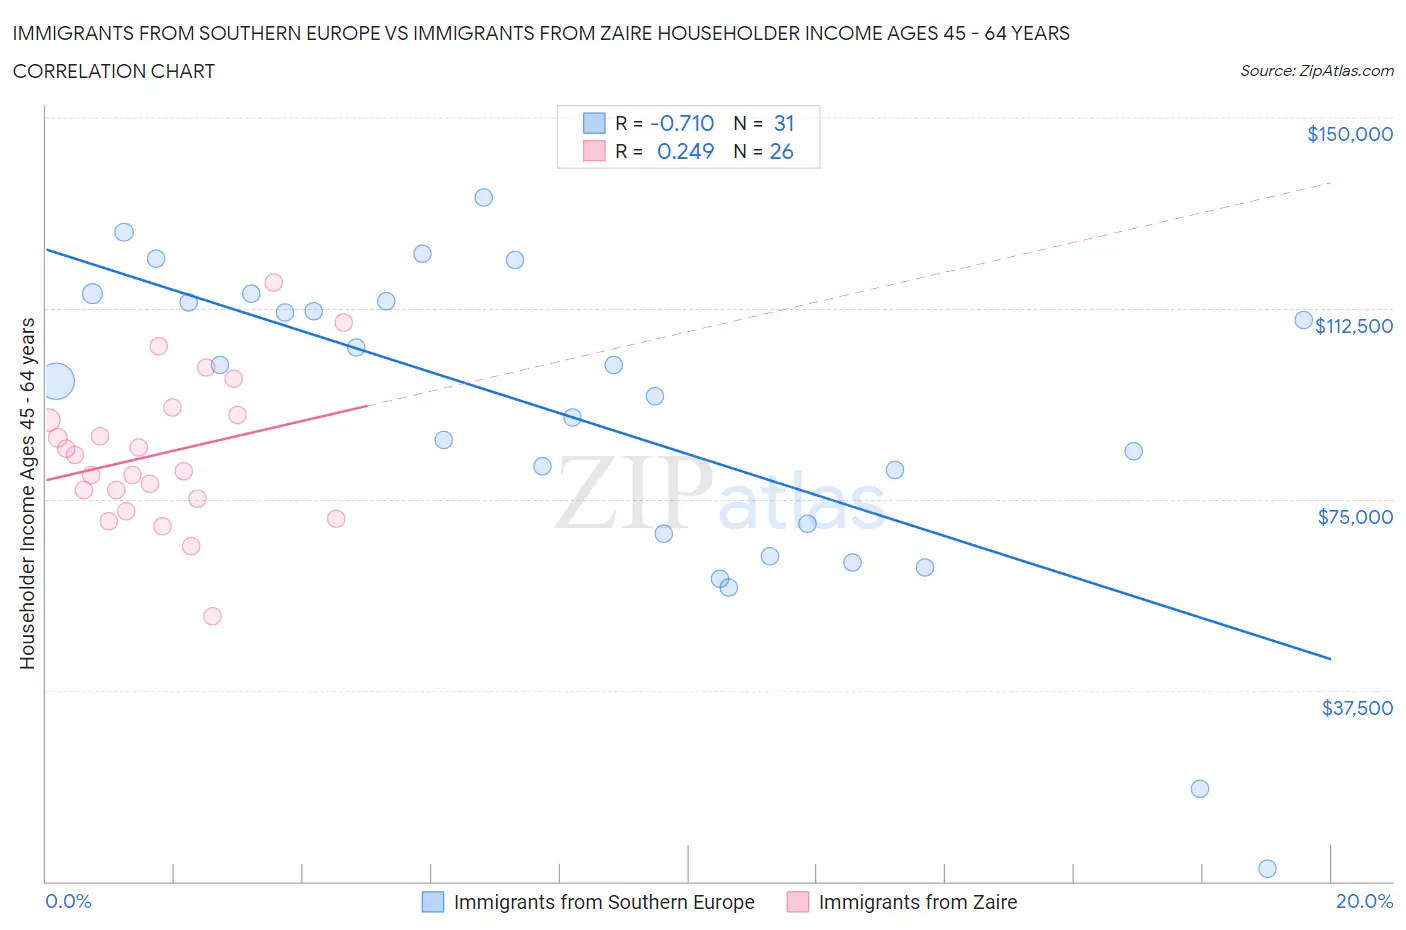 Immigrants from Southern Europe vs Immigrants from Zaire Householder Income Ages 45 - 64 years